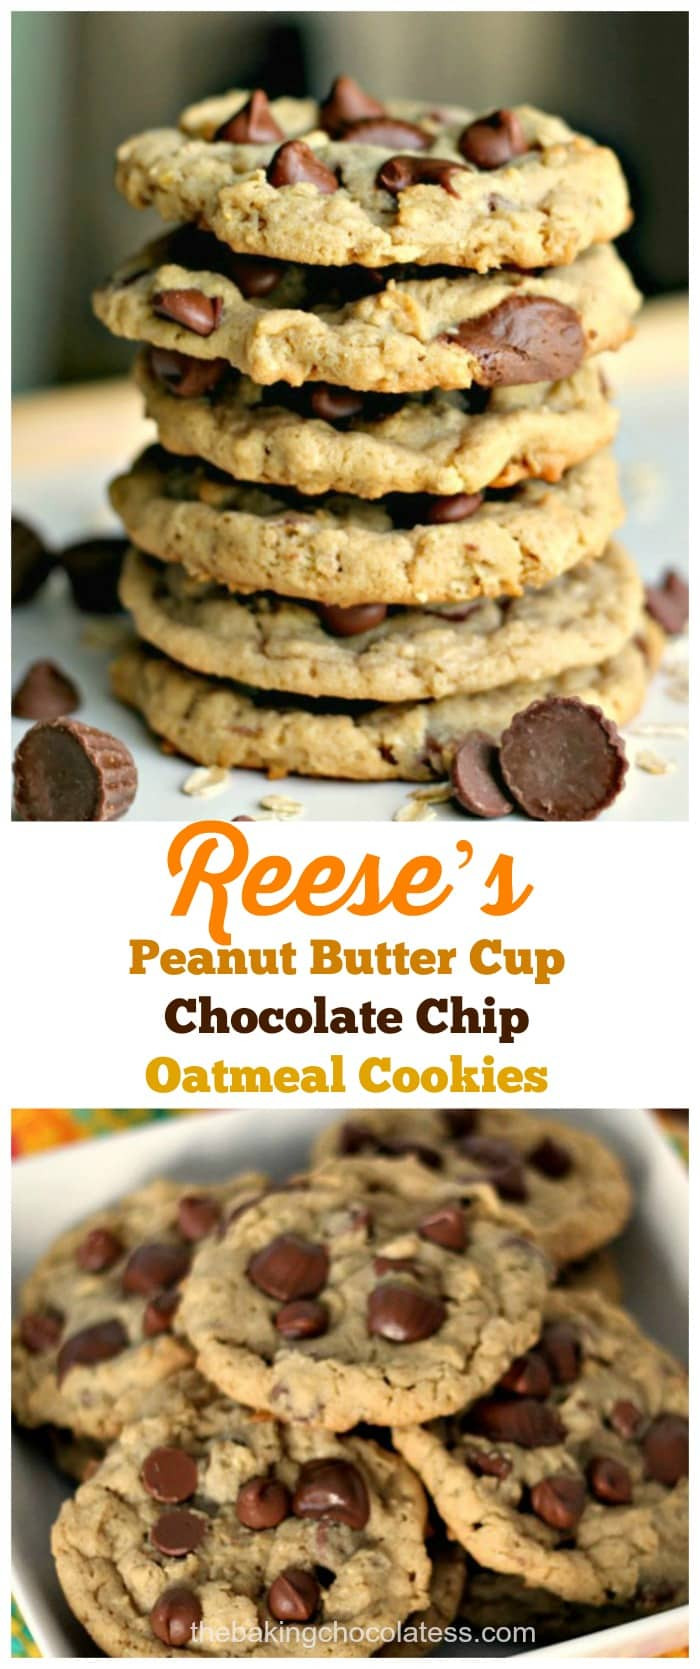 Reese Peanut Butter Cup Cookies Recipe
 Reese’s Peanut Butter Cup Chocolate Chip Oatmeal Cookies